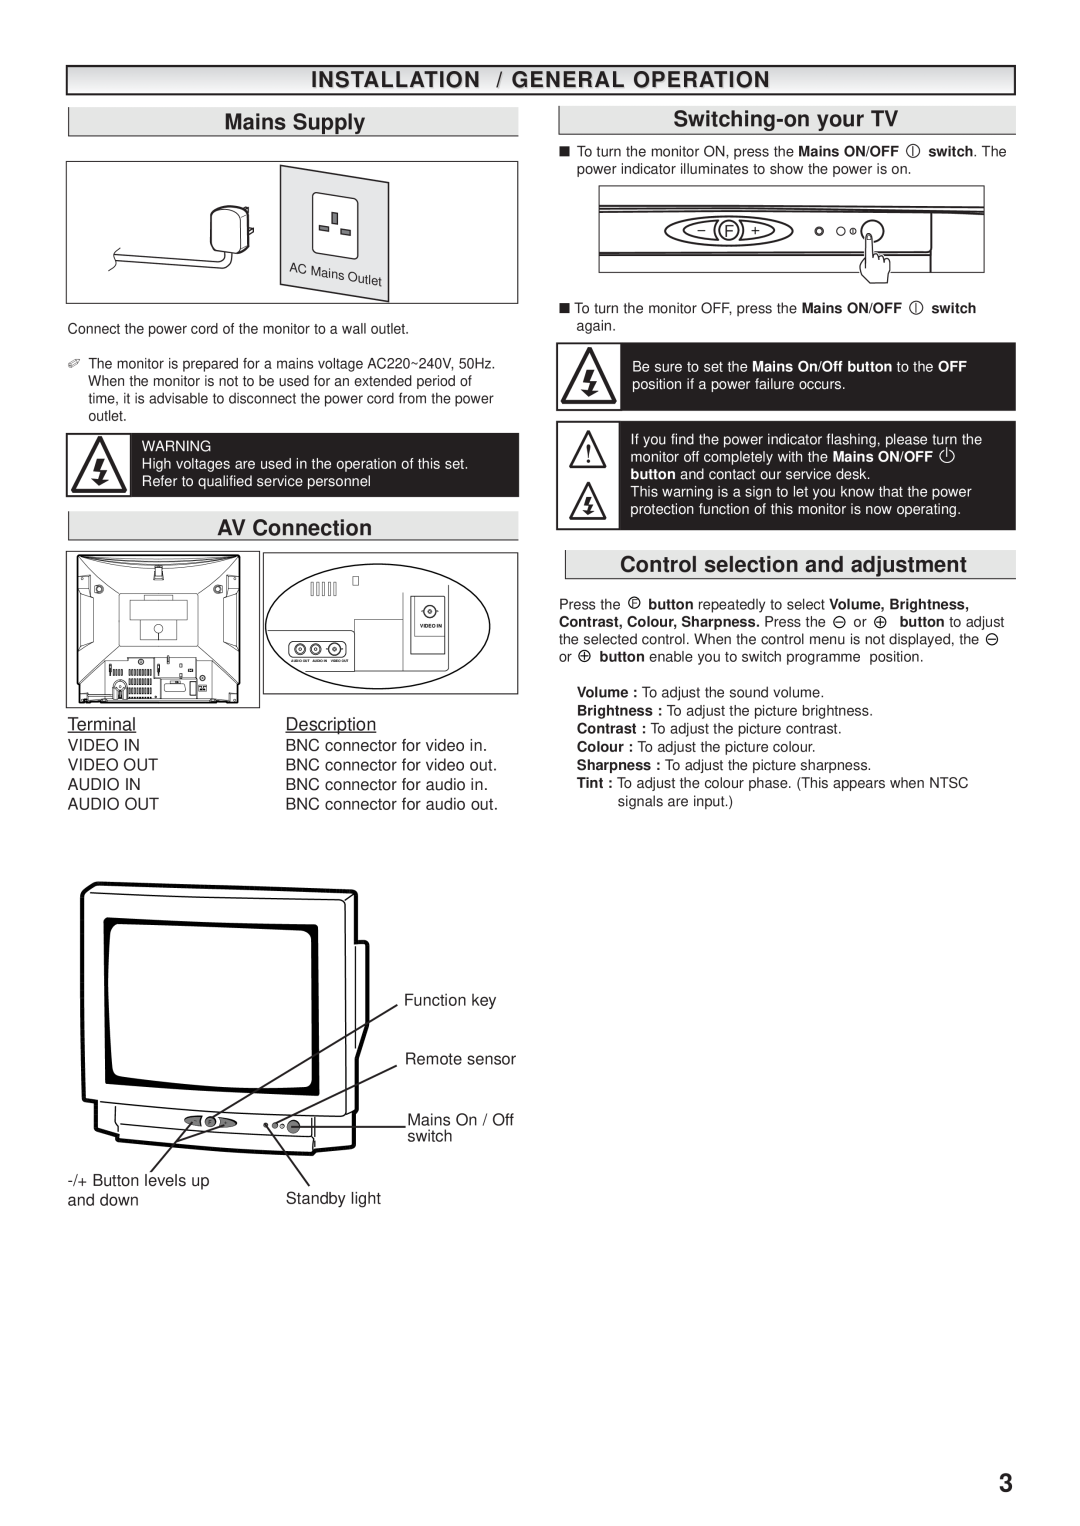 Sanyo VMC-7321P Installation / General Operation, Mains Supply, Switching-on your TV, AV Connection, Terminal, Description 